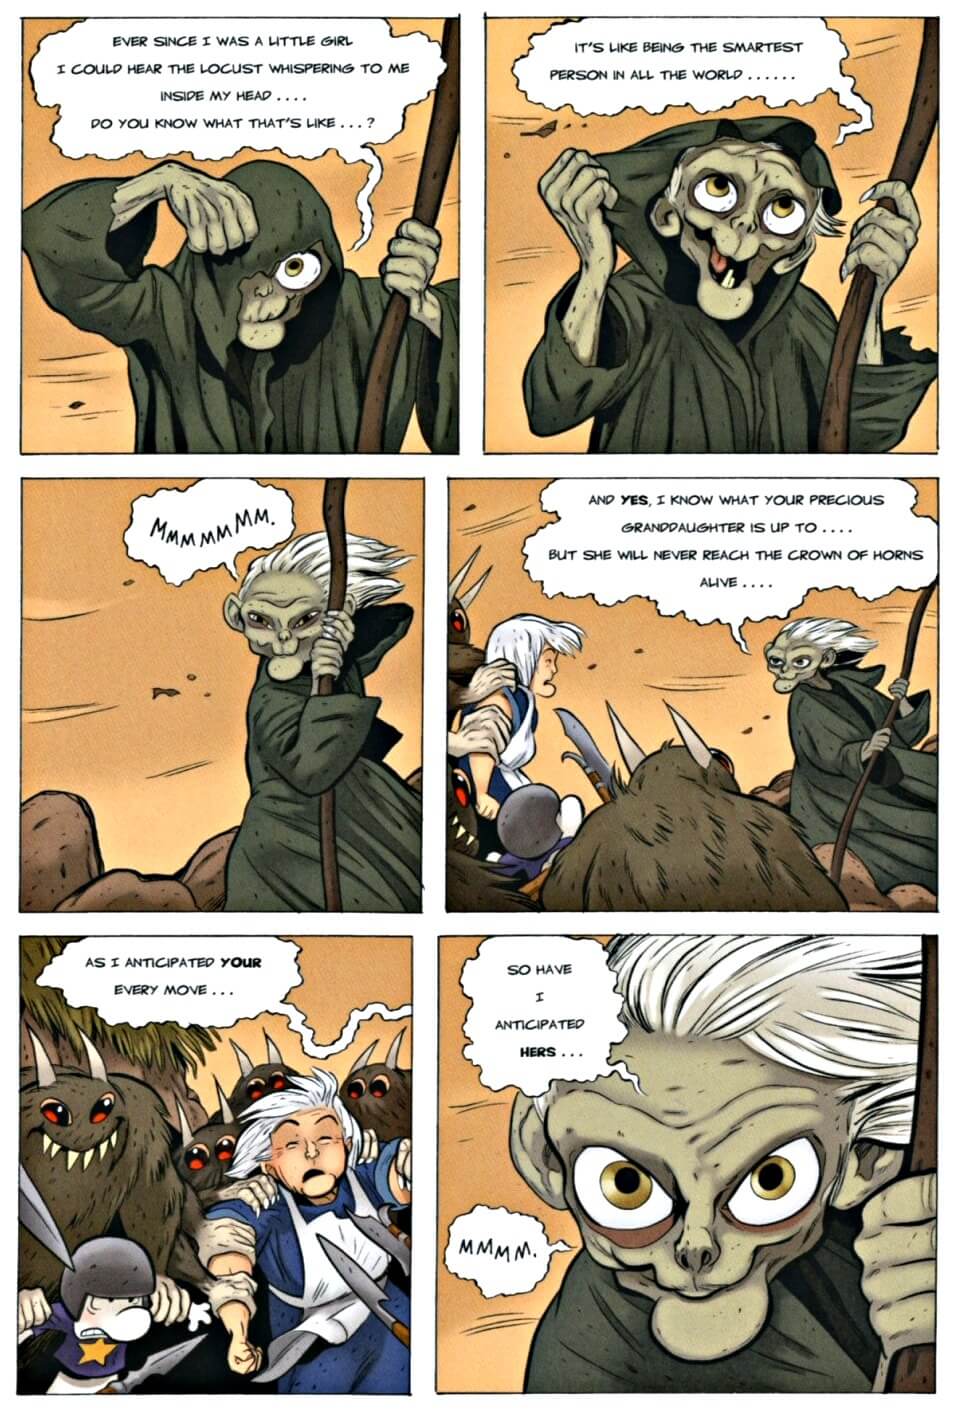 page 130 chapter 5 of bone 9 crown of horns graphic novel